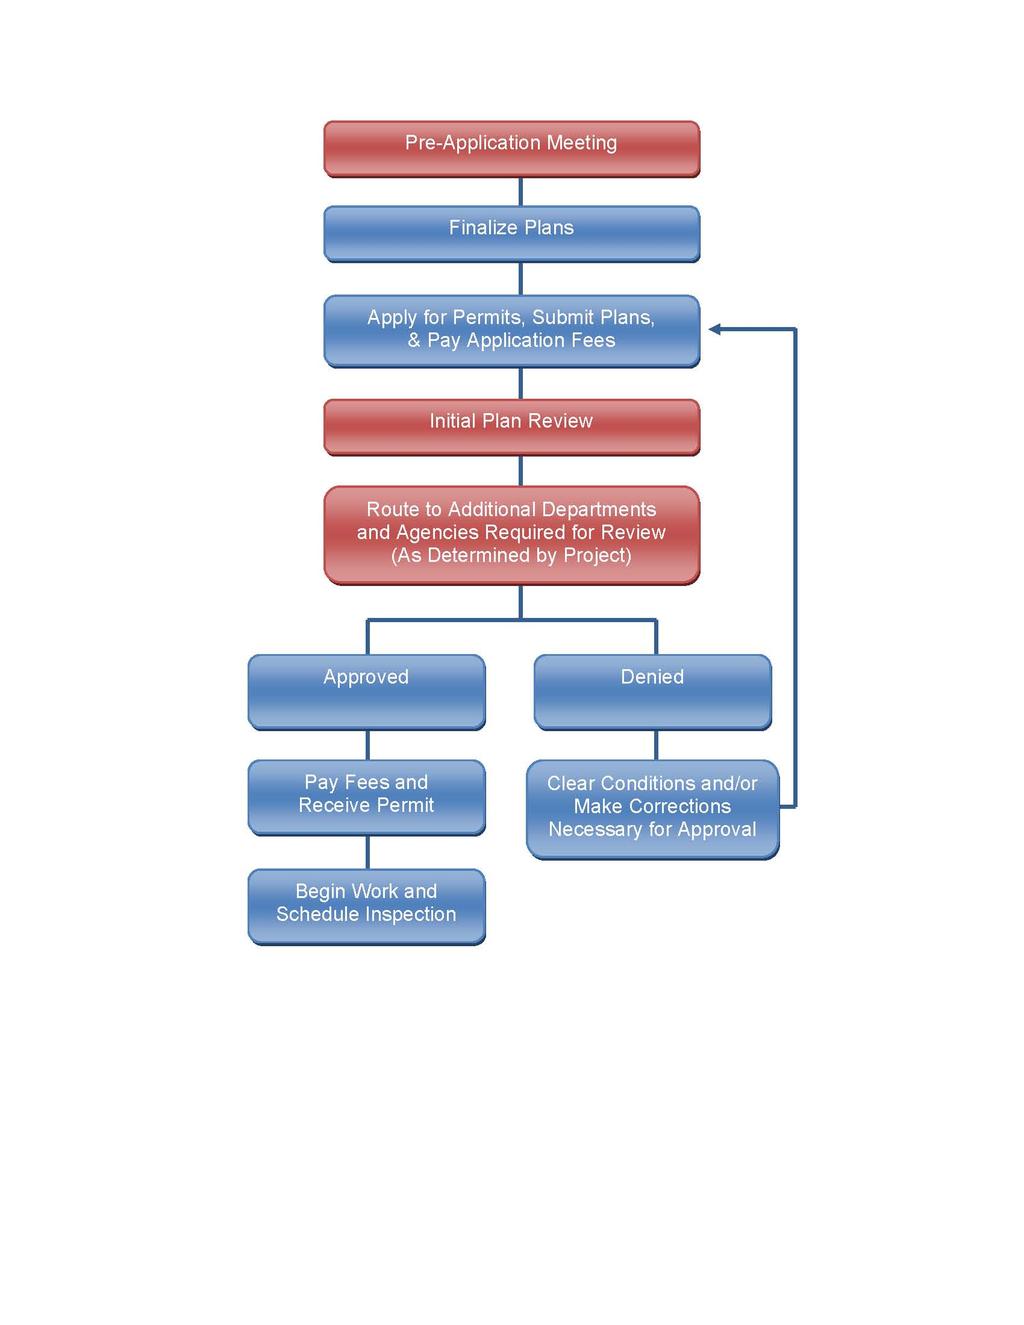 Figure 2: Flow Chart Representing a Typical Planning or Building Permit Approval Process Figure 2 illustrates the typical planning or building permit approval process for local agencies.